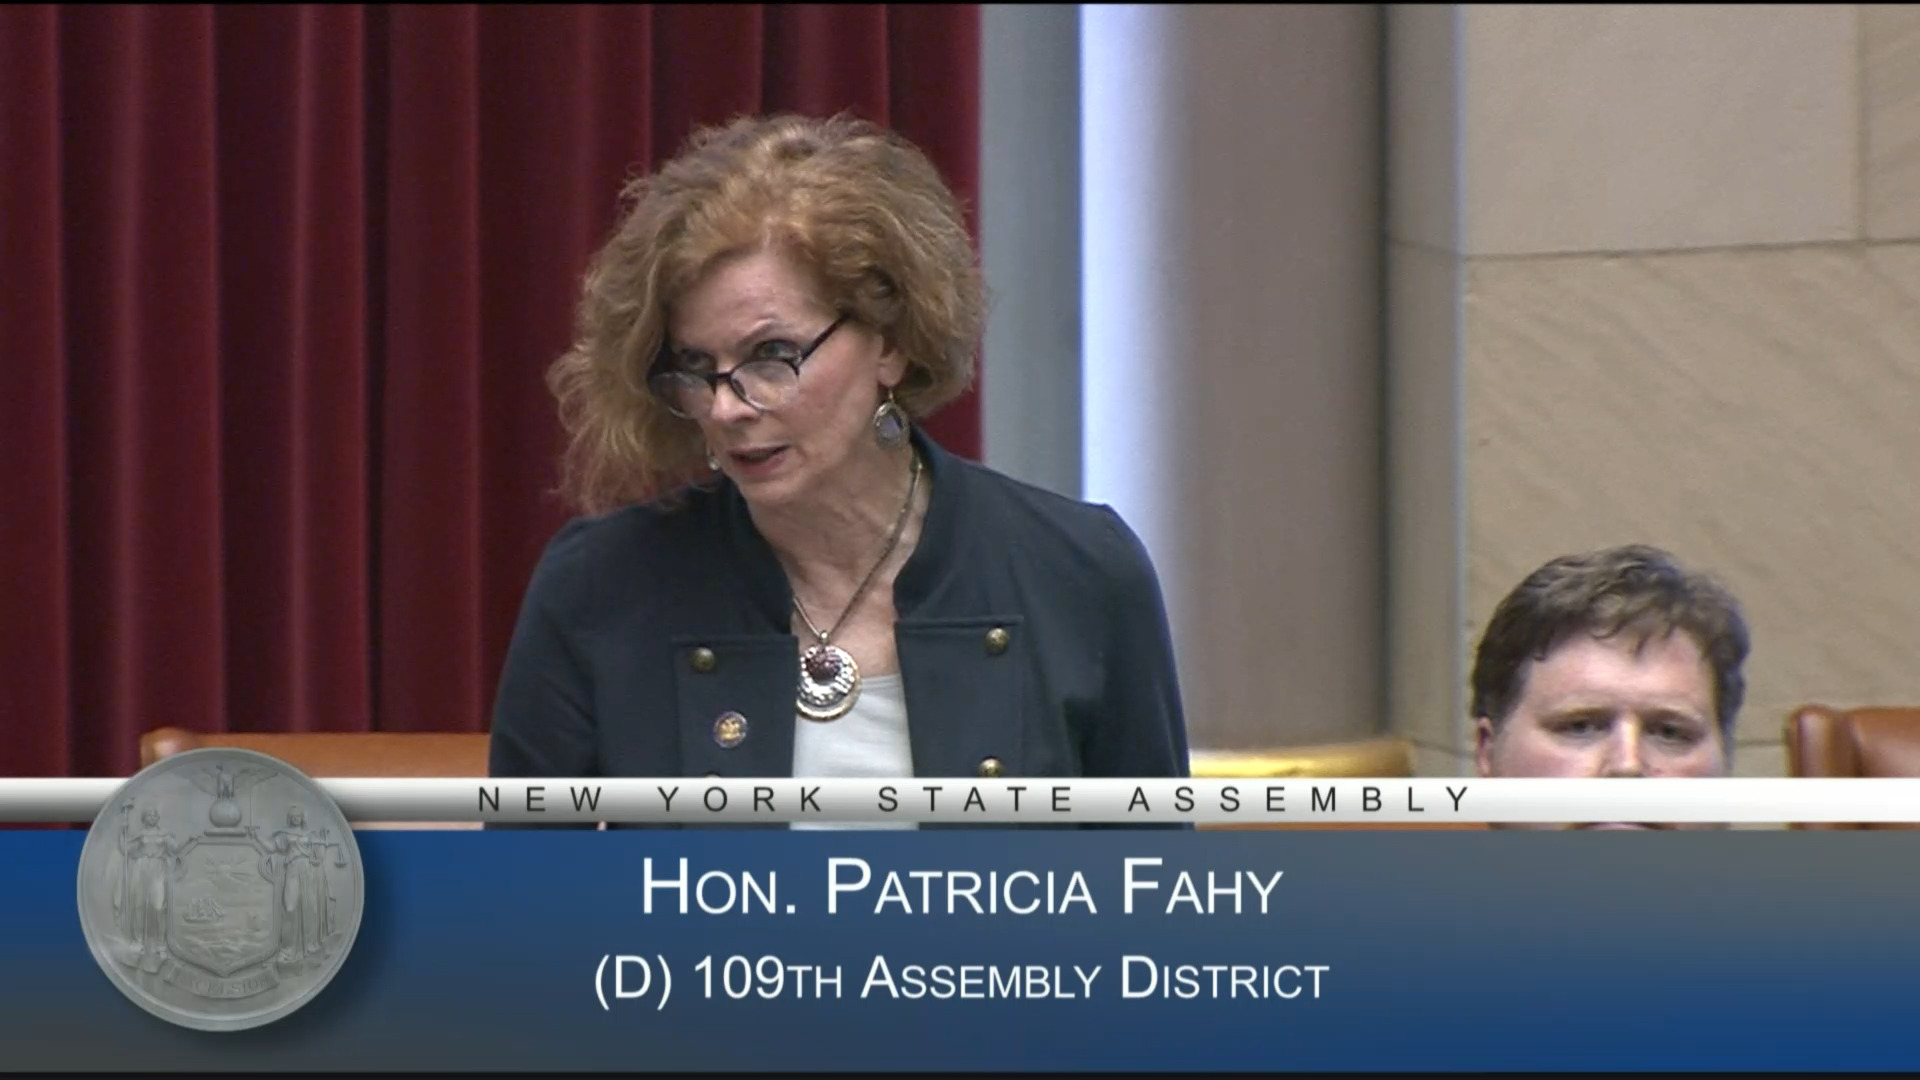 Fahy Bill on Dangers of Firearms Passes Assembly